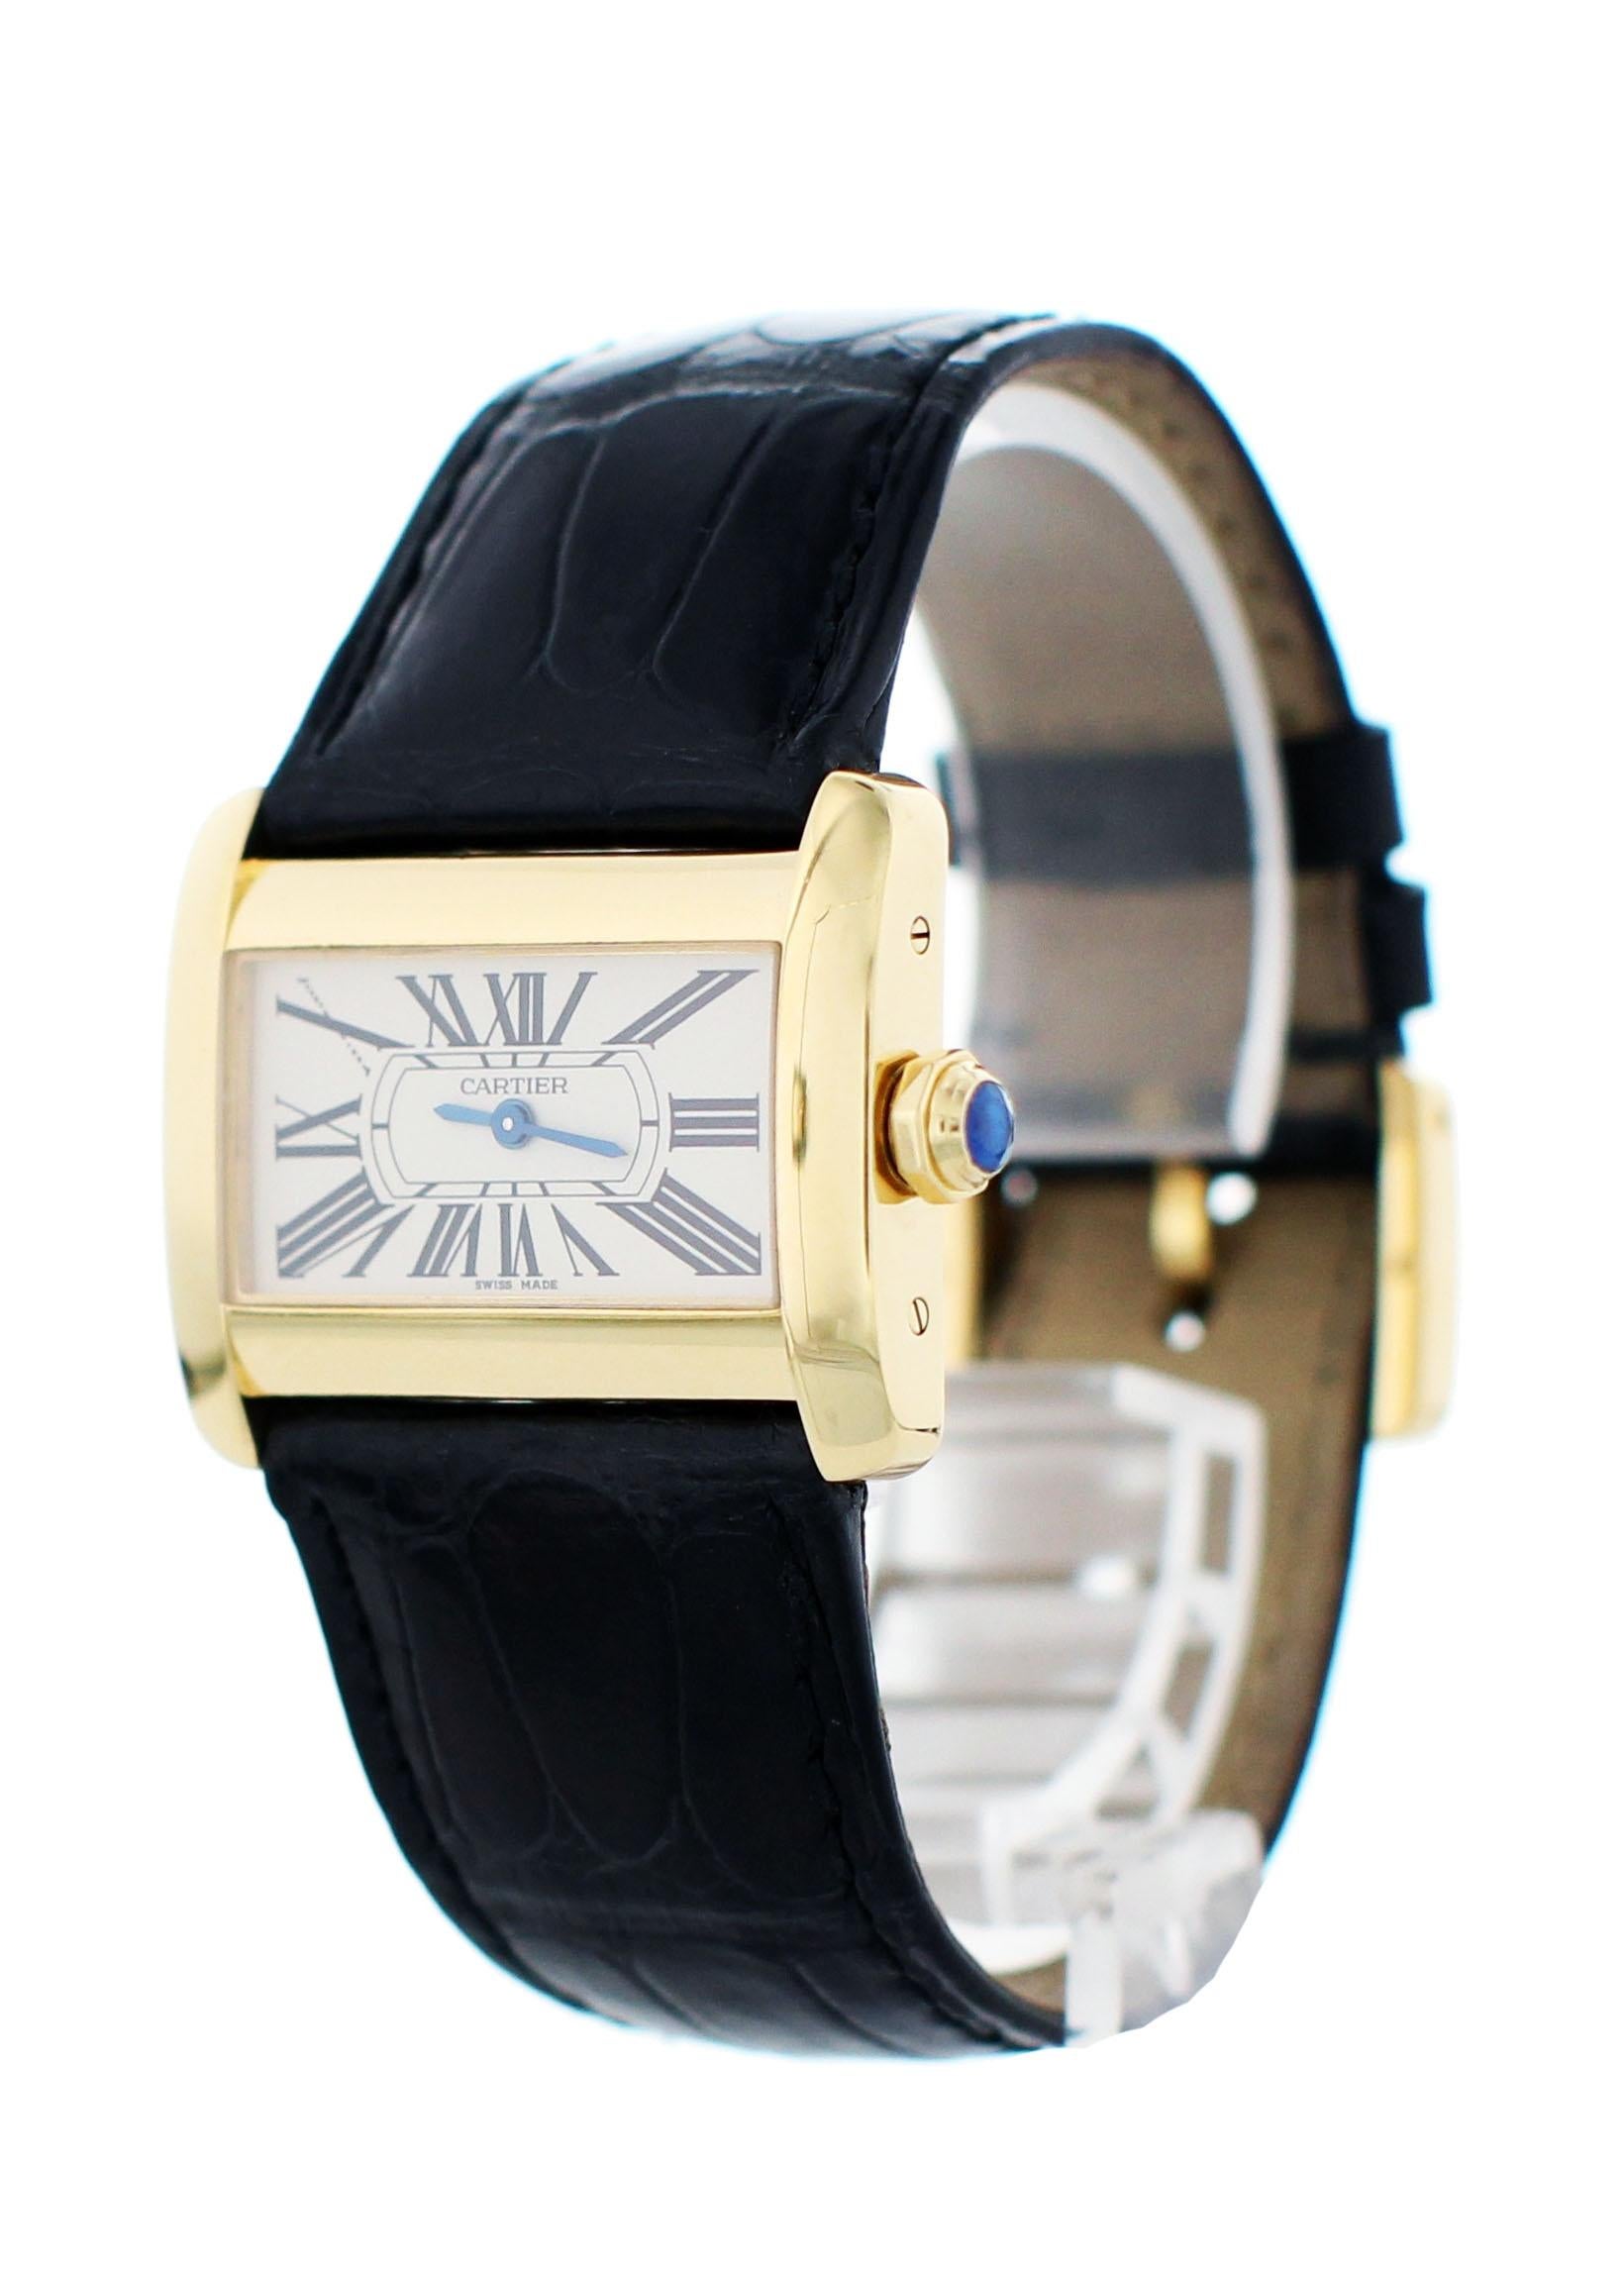 Cartier Tank Divan 18K Yellow Gold 2601 Ladies Watch. 31 x 25 mm 18k yellow gold case. White dial with blue steel hands and black Roman numerals hour markers.  Adjustable black alligator leather band with an 18k yellow gold buckle. Automatic